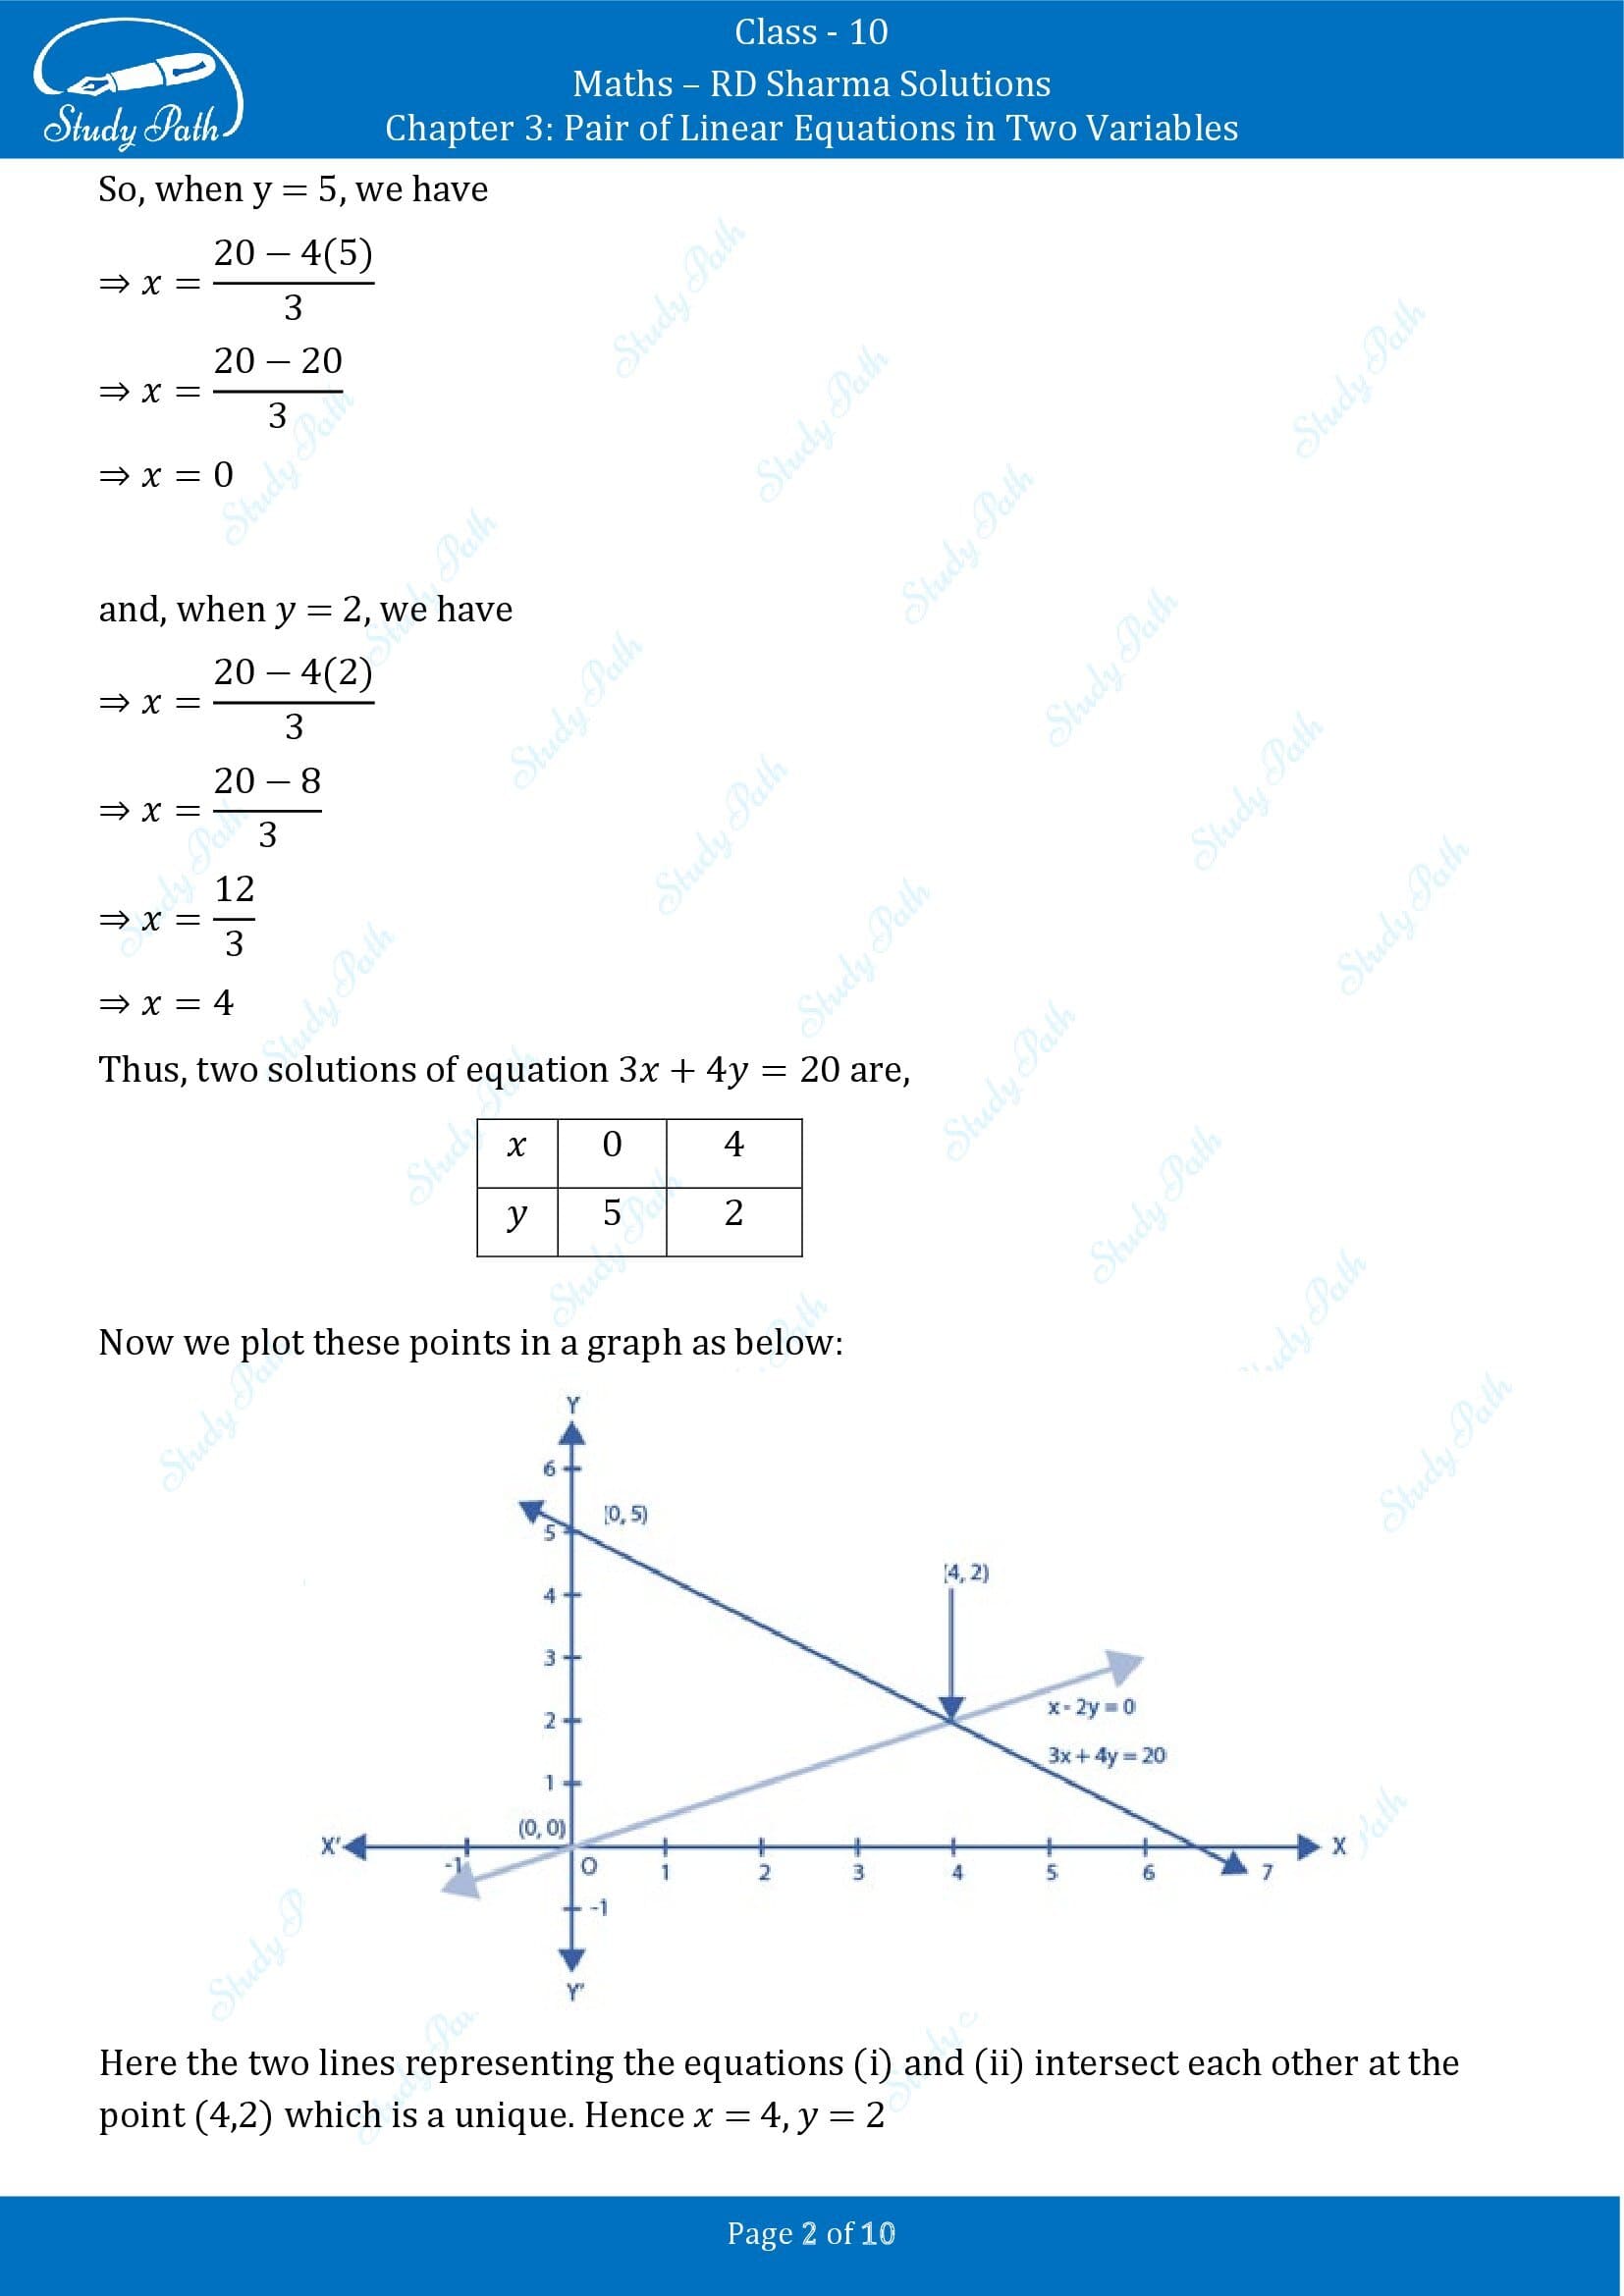 RD Sharma Solutions Class 10 Chapter 3 Pair of Linear Equations in Two Variables Exercise 3.1 00002